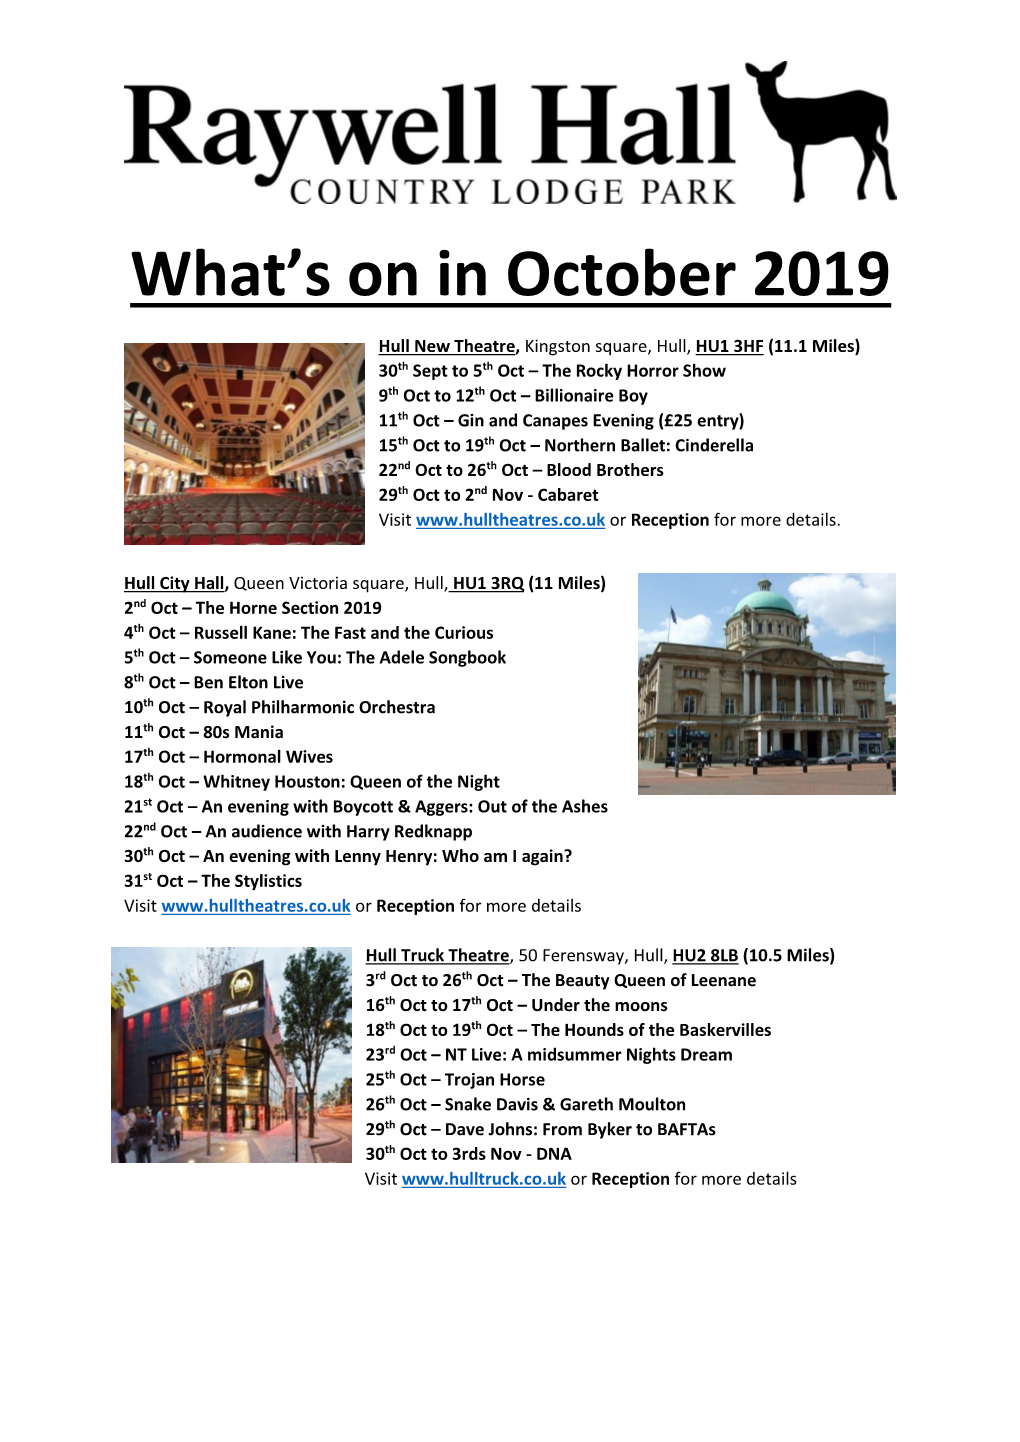 What's on in October 2019